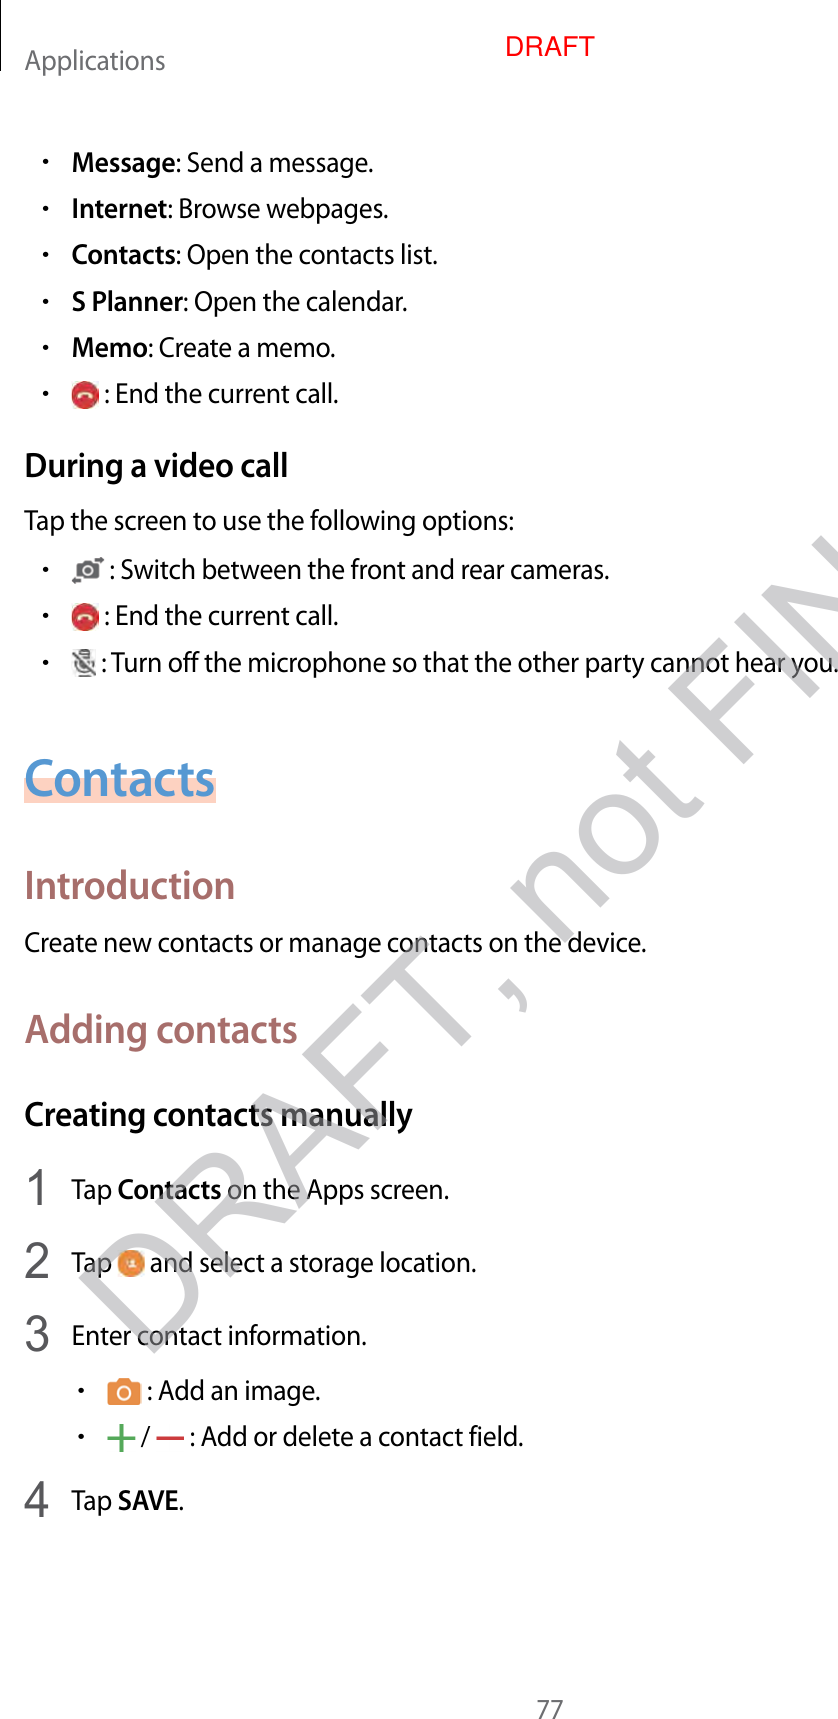 Applications77•Message: Send a message.•Internet: Browse webpages.•Contacts: Open the contacts list.•S Planner: Open the calendar.•Memo: Create a memo.• : End the current call.During a video callTap the screen to use the following options:• : Switch between the front and rear cameras.• : End the current call.• : Turn off the microphone so that the other party cannot hear you.ContactsIntroductionCreate new contacts or manage contacts on the device.Adding contactsCreating contacts manually1  Tap Contacts on the Apps screen.2  Tap   and select a storage location.3  Enter contact information.• : Add an image.• /   : Add or delete a contact field.4  Tap SAVE.DRAFT, not FINALDRAFT